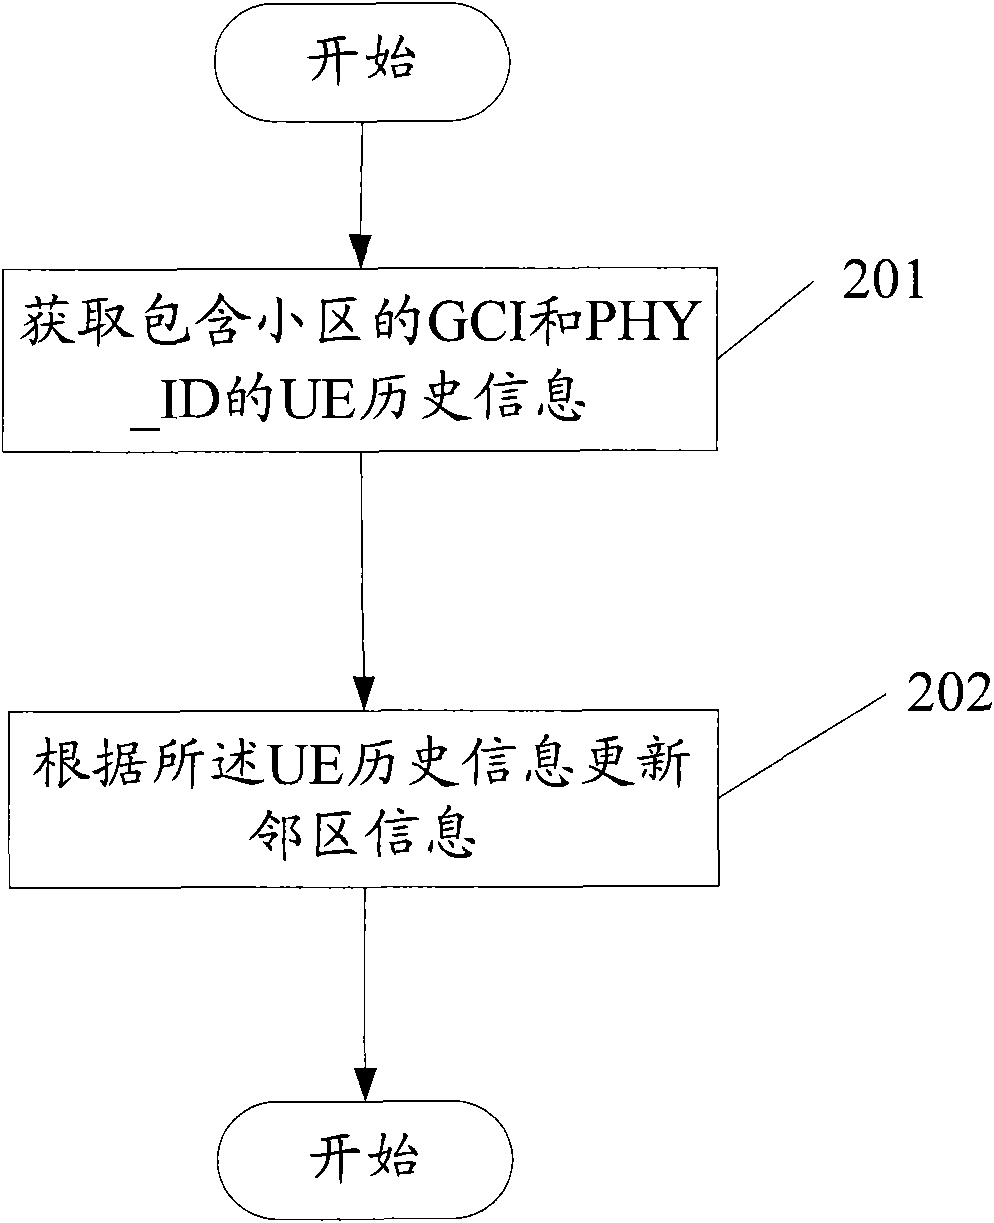 Method, device and base station for updating information in adjacent regions